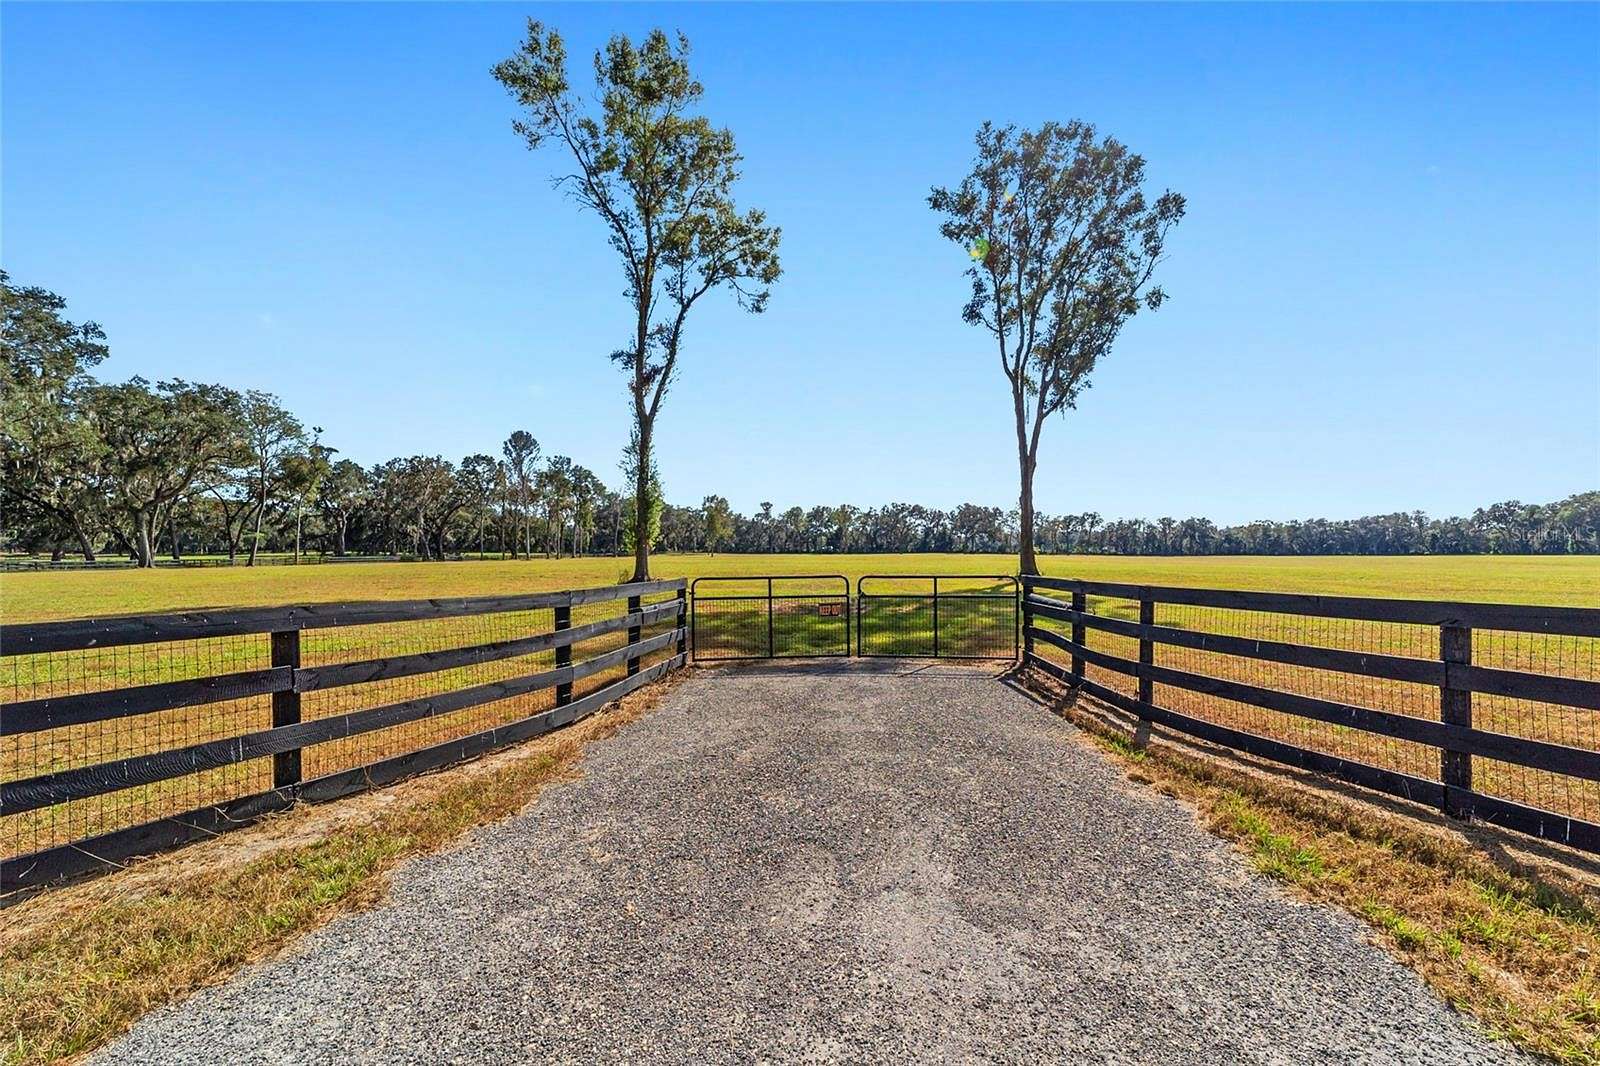 40 Acres of Agricultural Land for Sale in Ocala, Florida